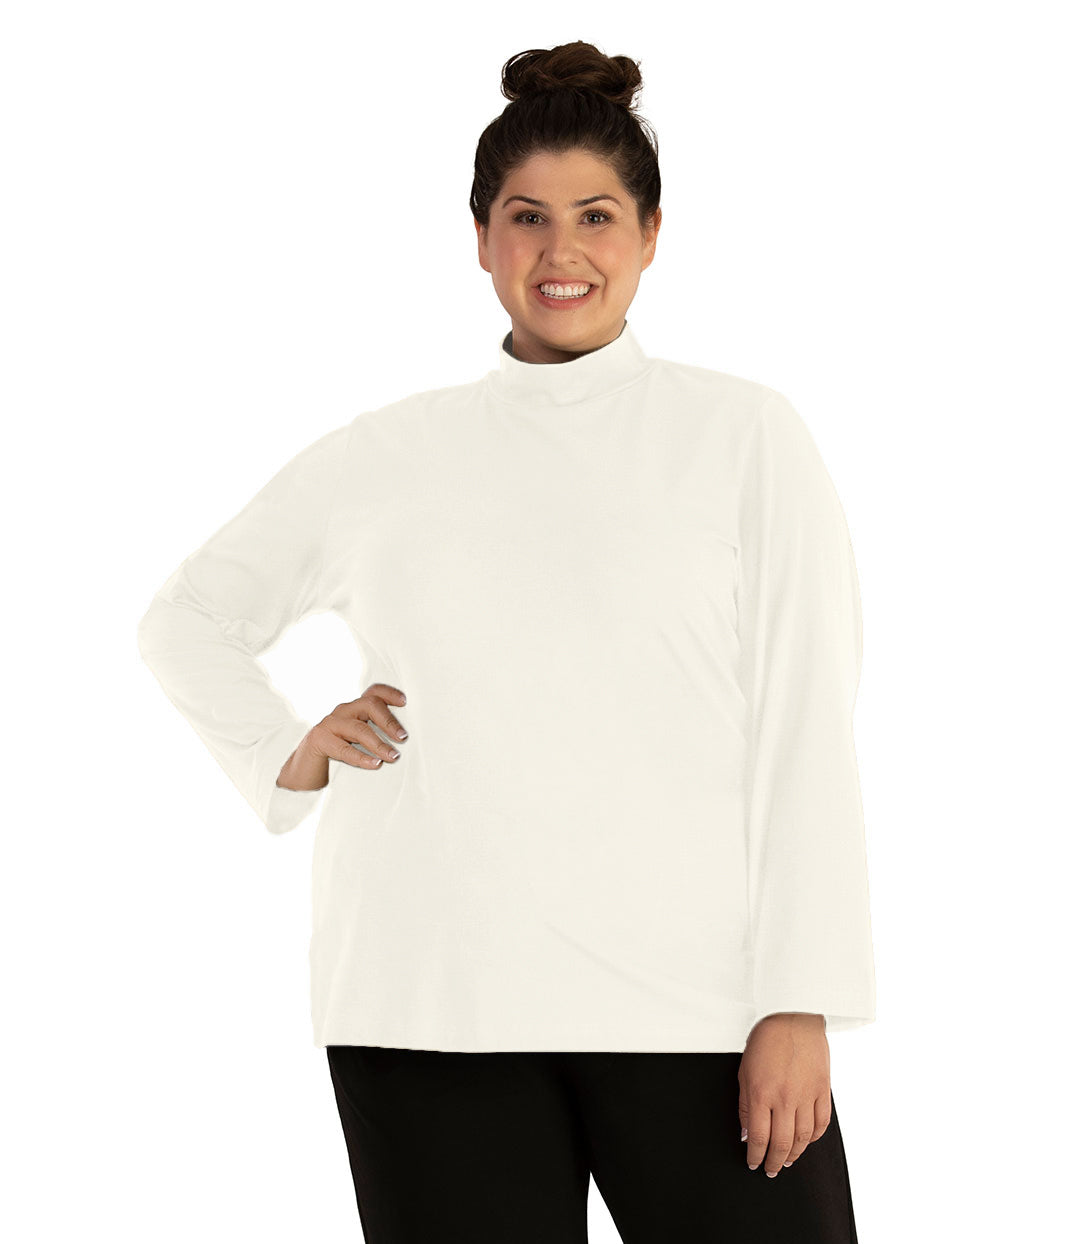 Plus size woman, facing front, wearing JunoActive plus size Stretch Naturals Lite Mock Neck Top in the color Winter White. She is wearing JunoActive Plus Size Leggings in the color Black.